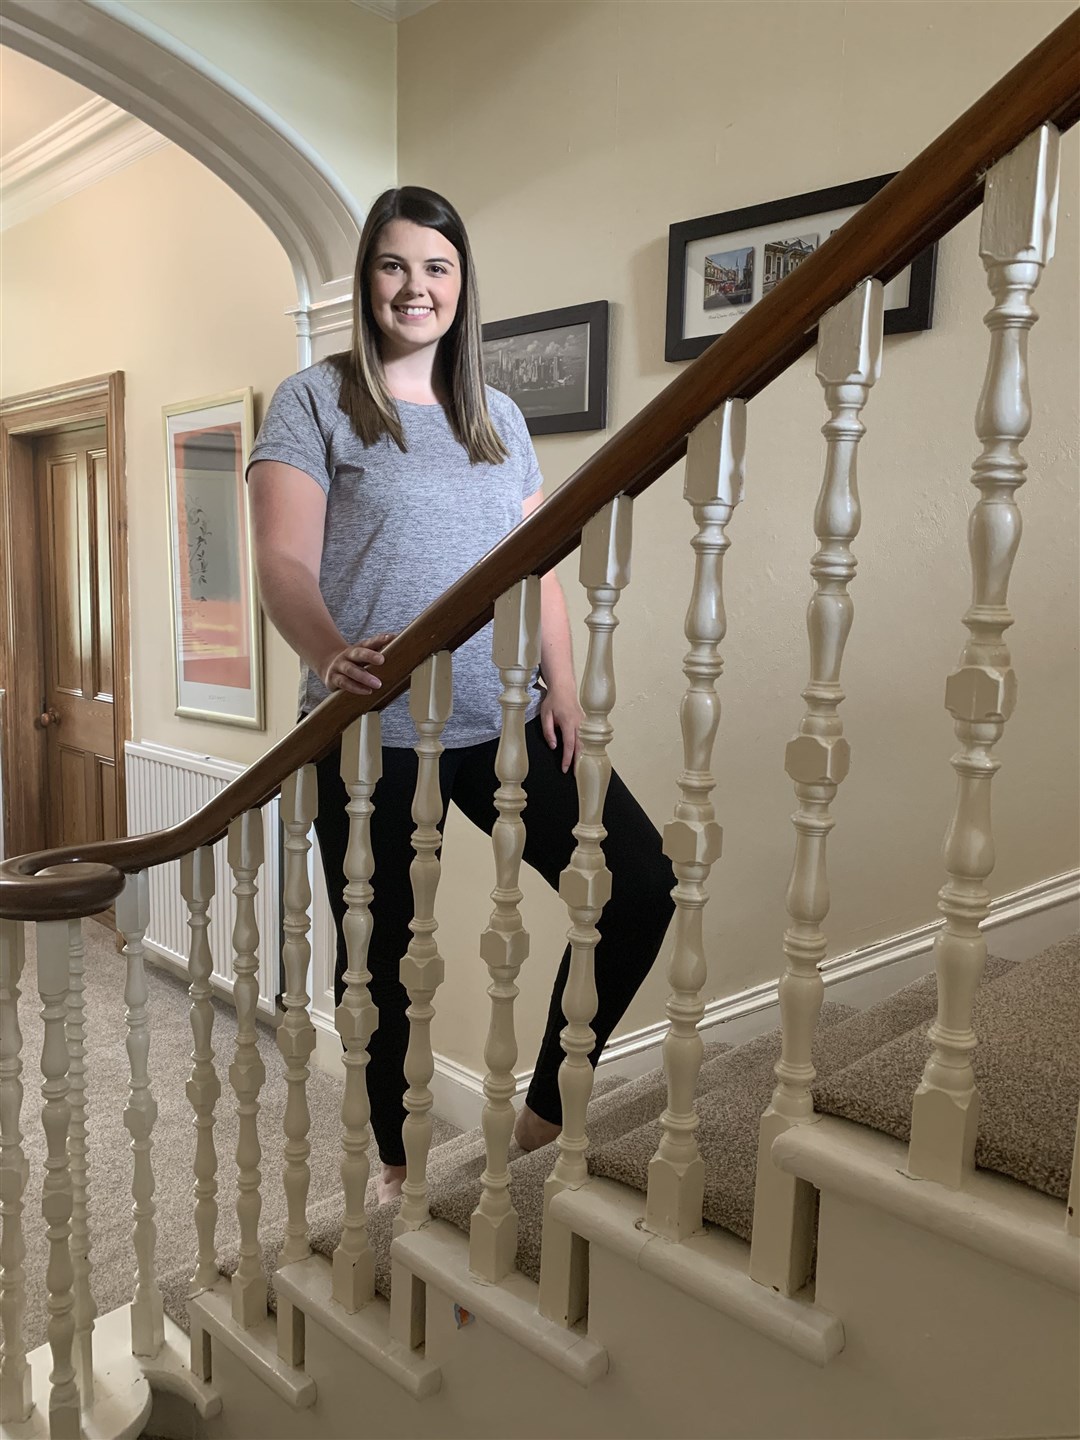 Catriona Macrae is climbing her stairs to raise money for Mikeysline.